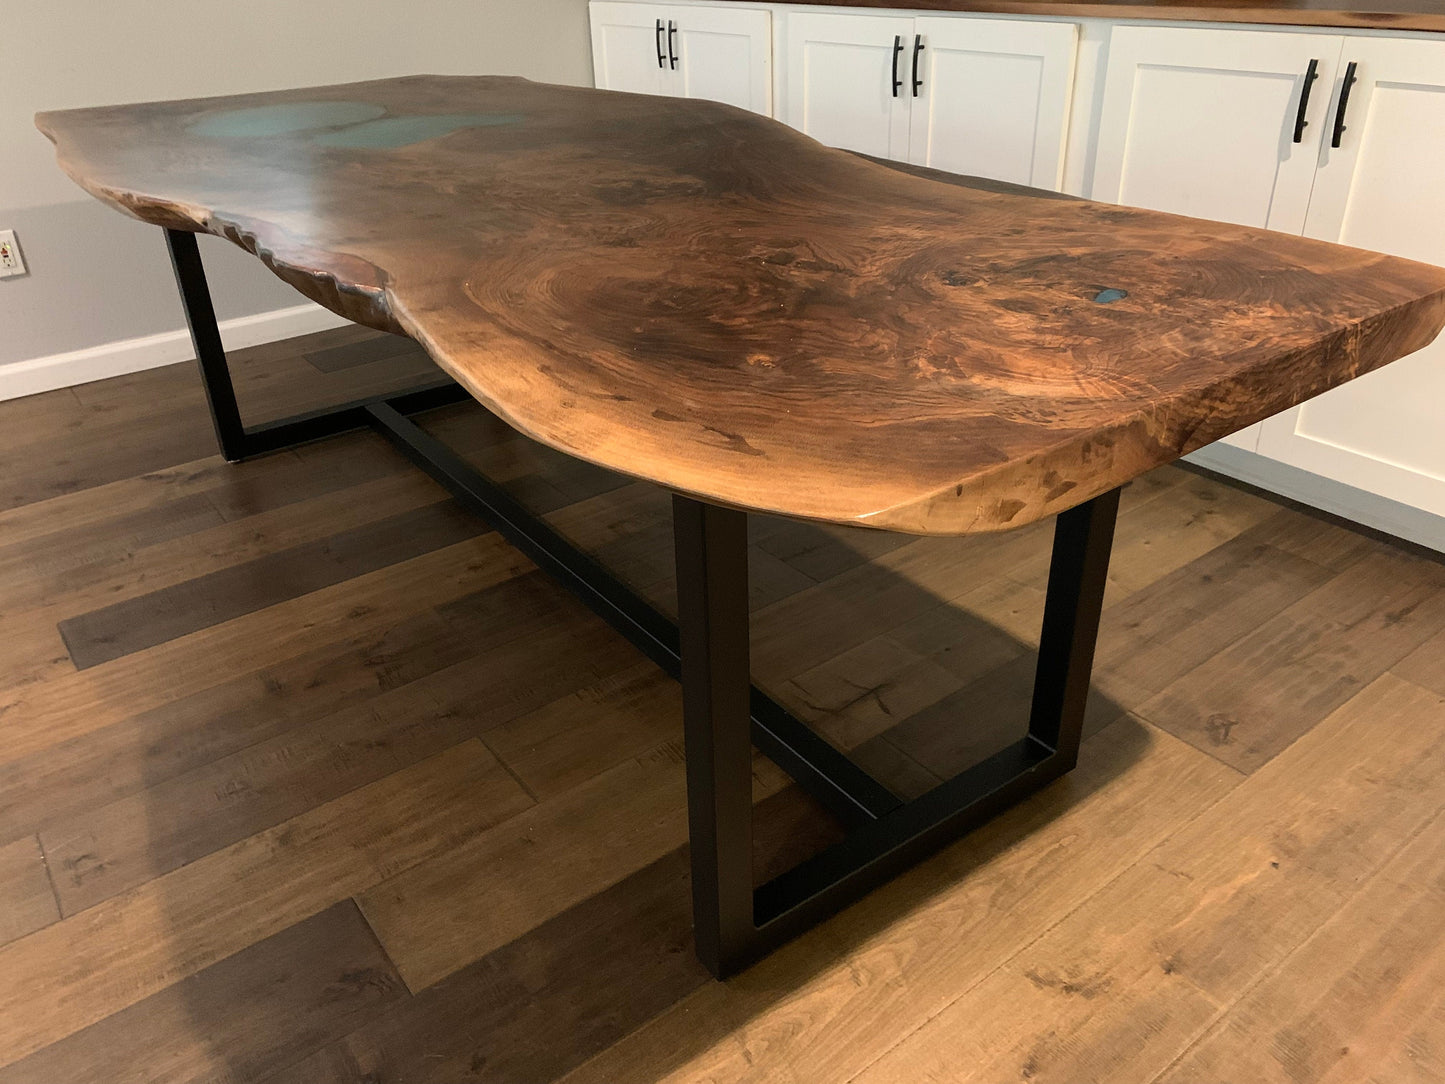 Large Live Edge Dining Table, 96 inch long, 8-10 seats, black walnut slab, 3 inch thick